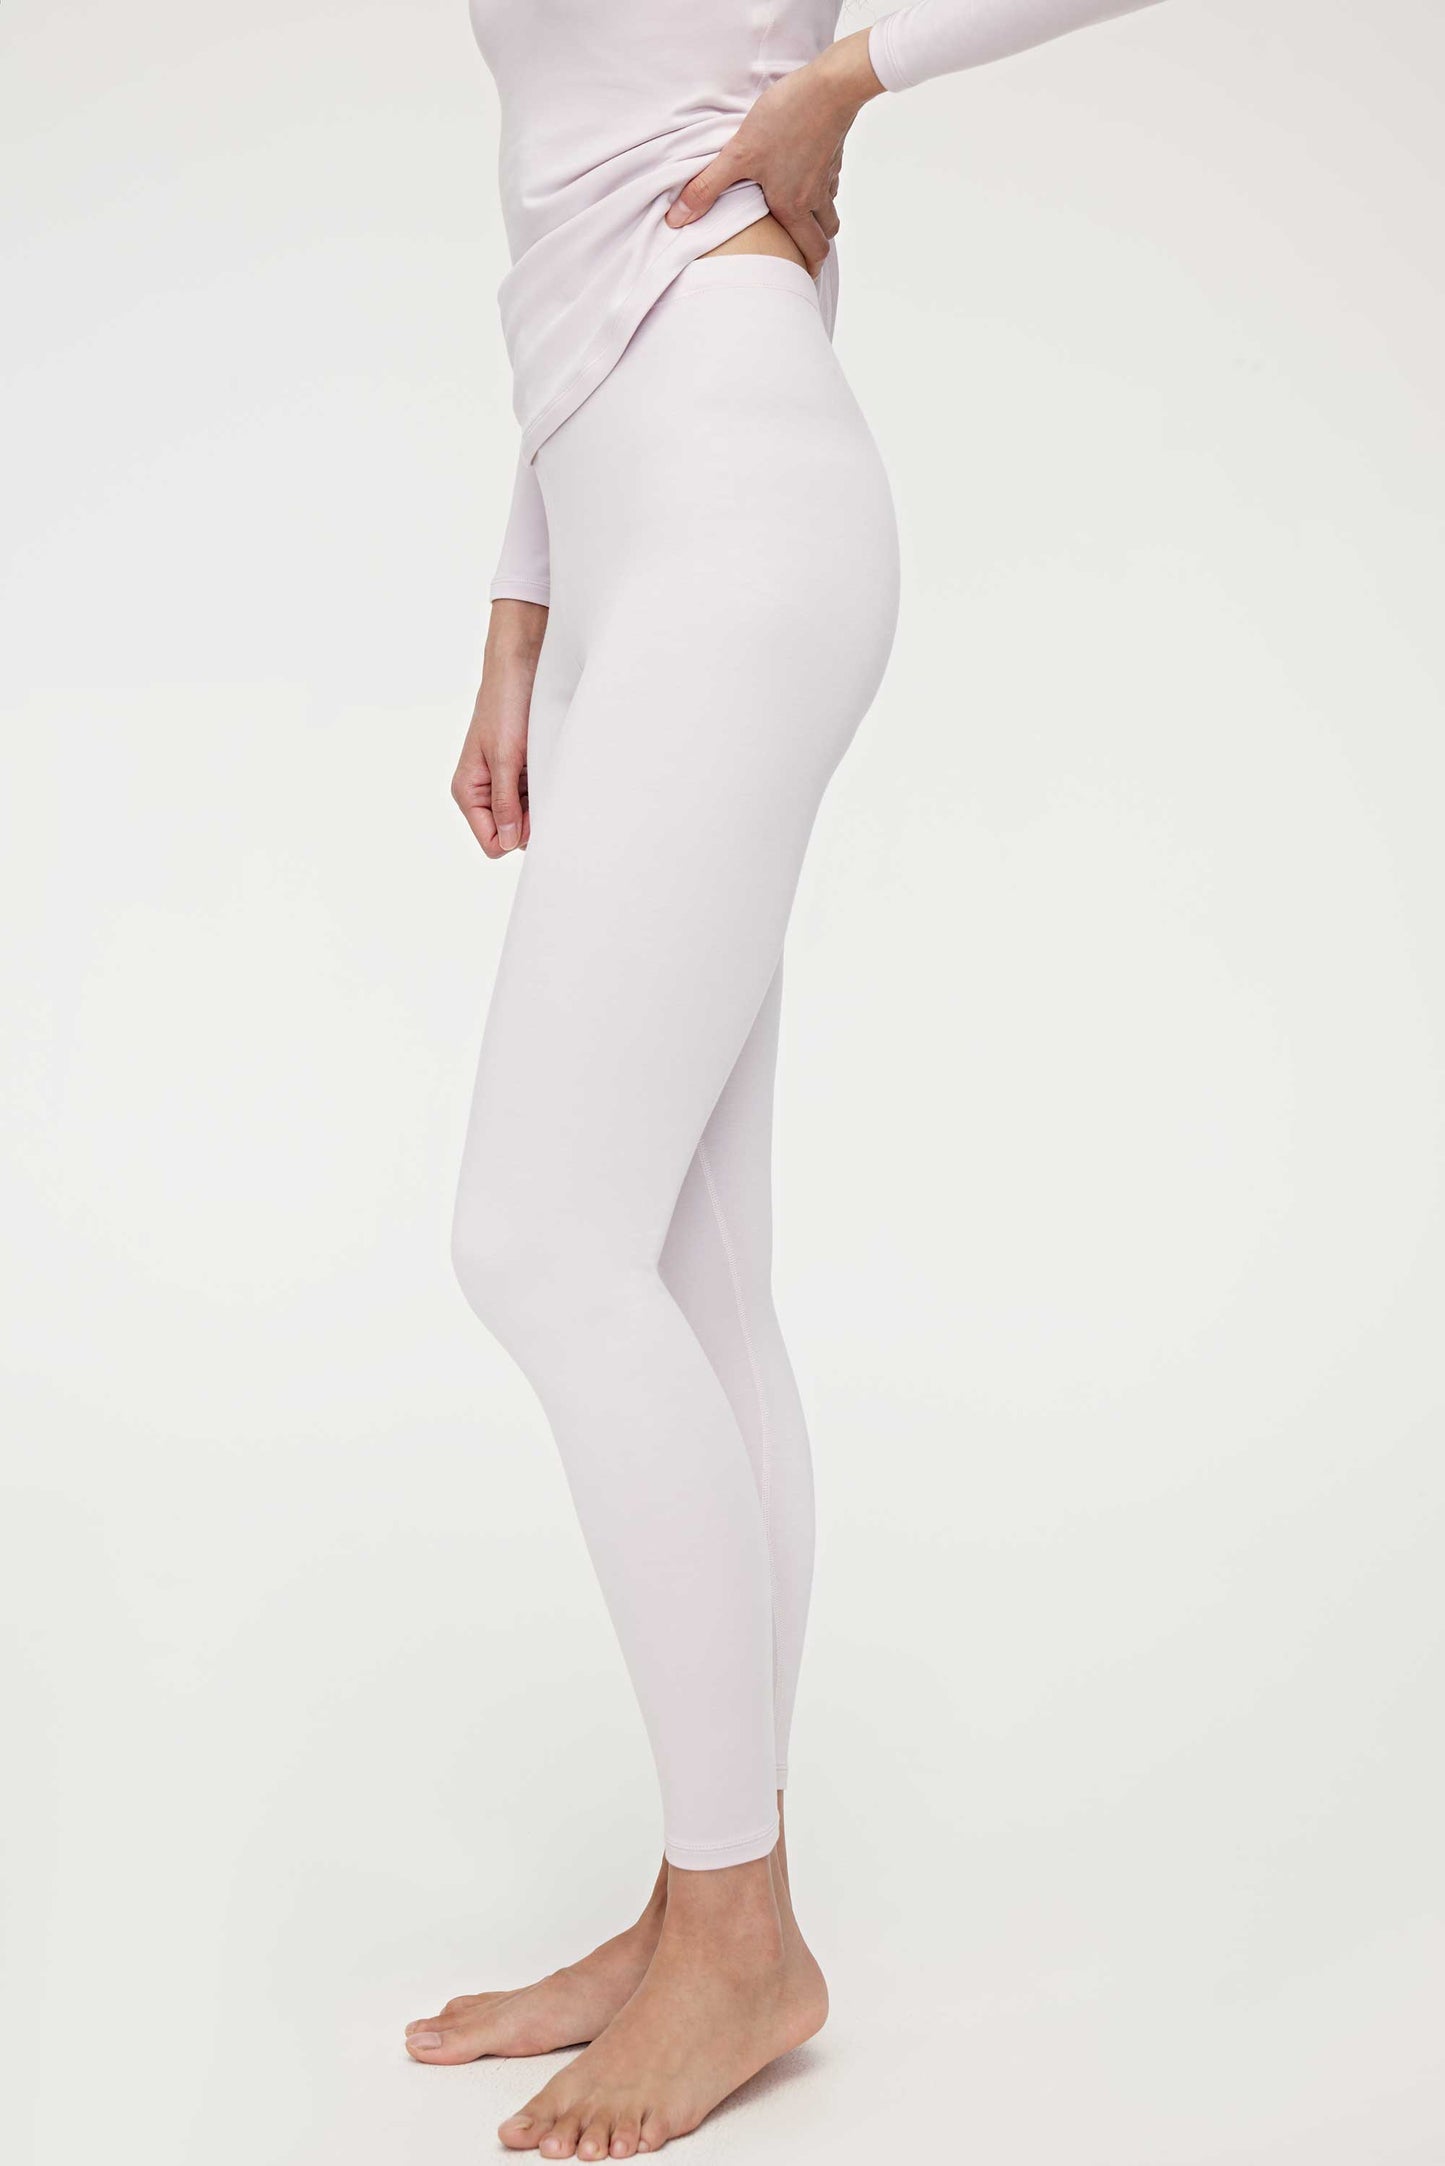 woman in light pink thermal pants